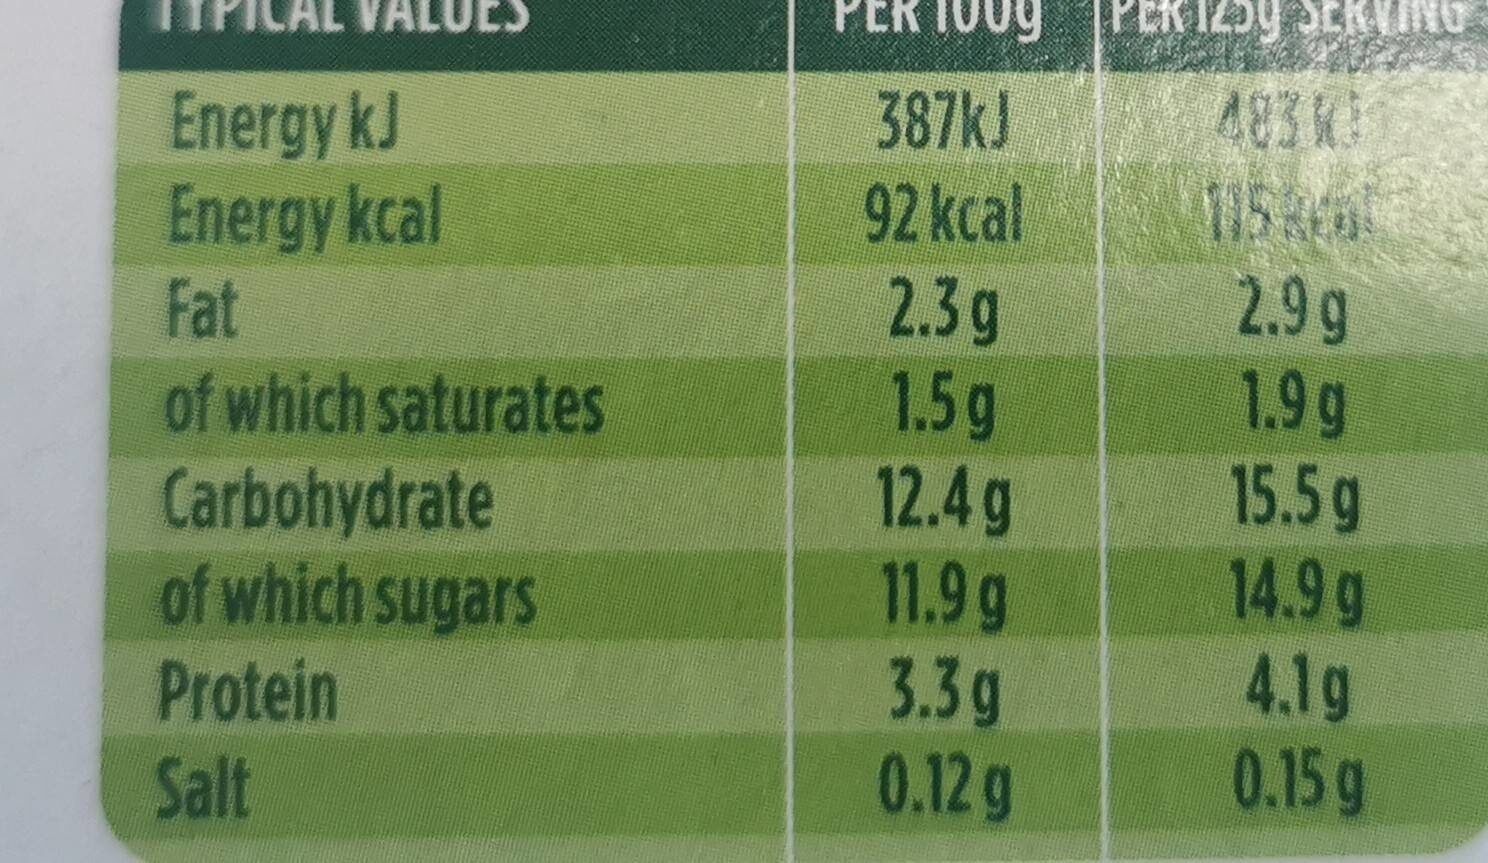 Original Blueberry - Nutrition facts